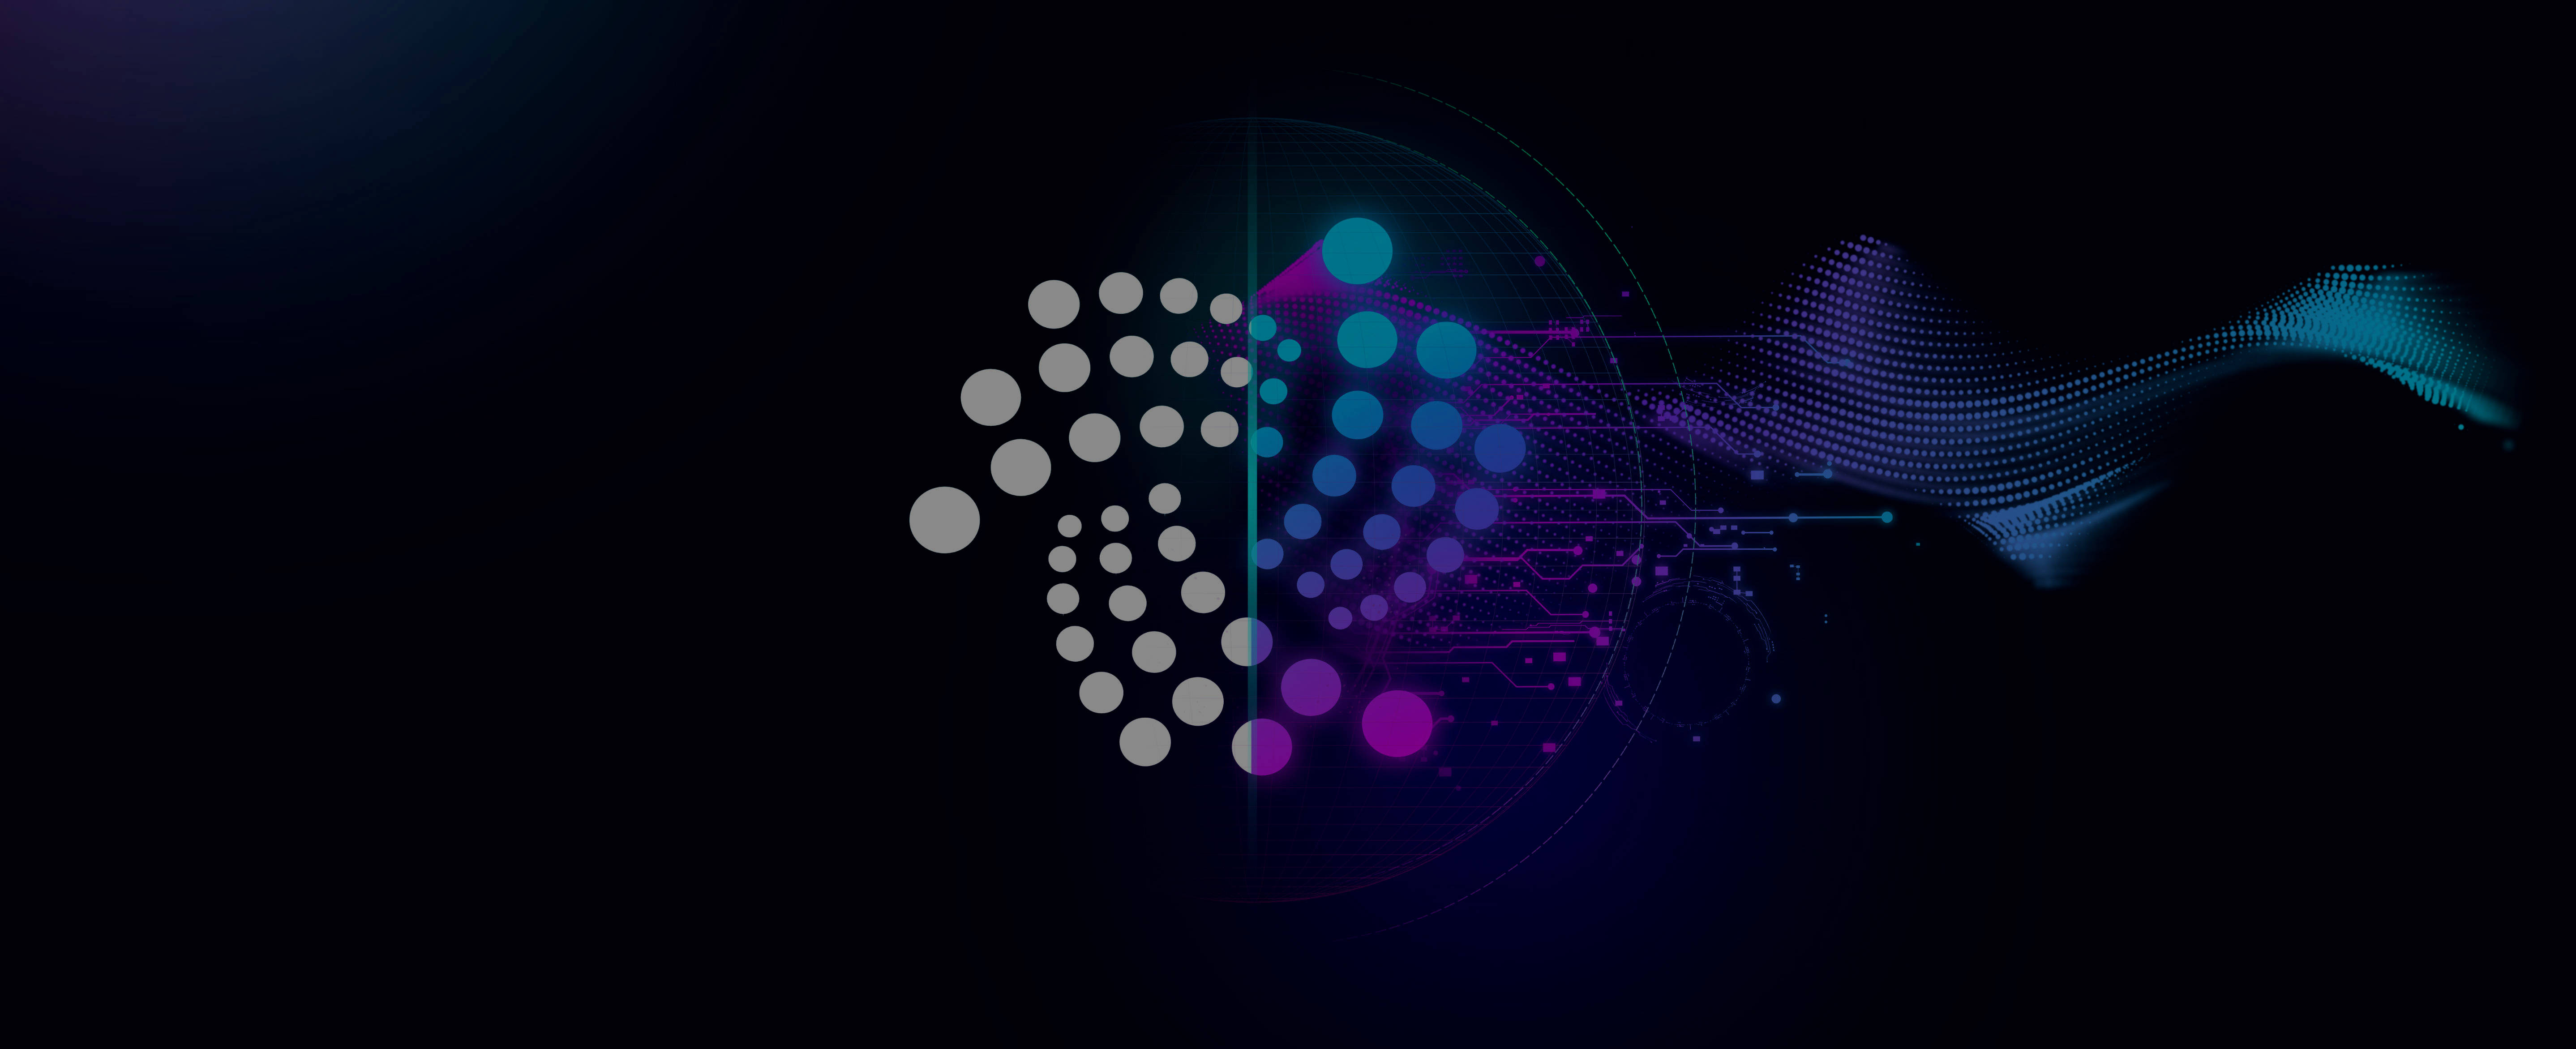 Secure Blockchain Marketplace By IOTA Backed by Big Names